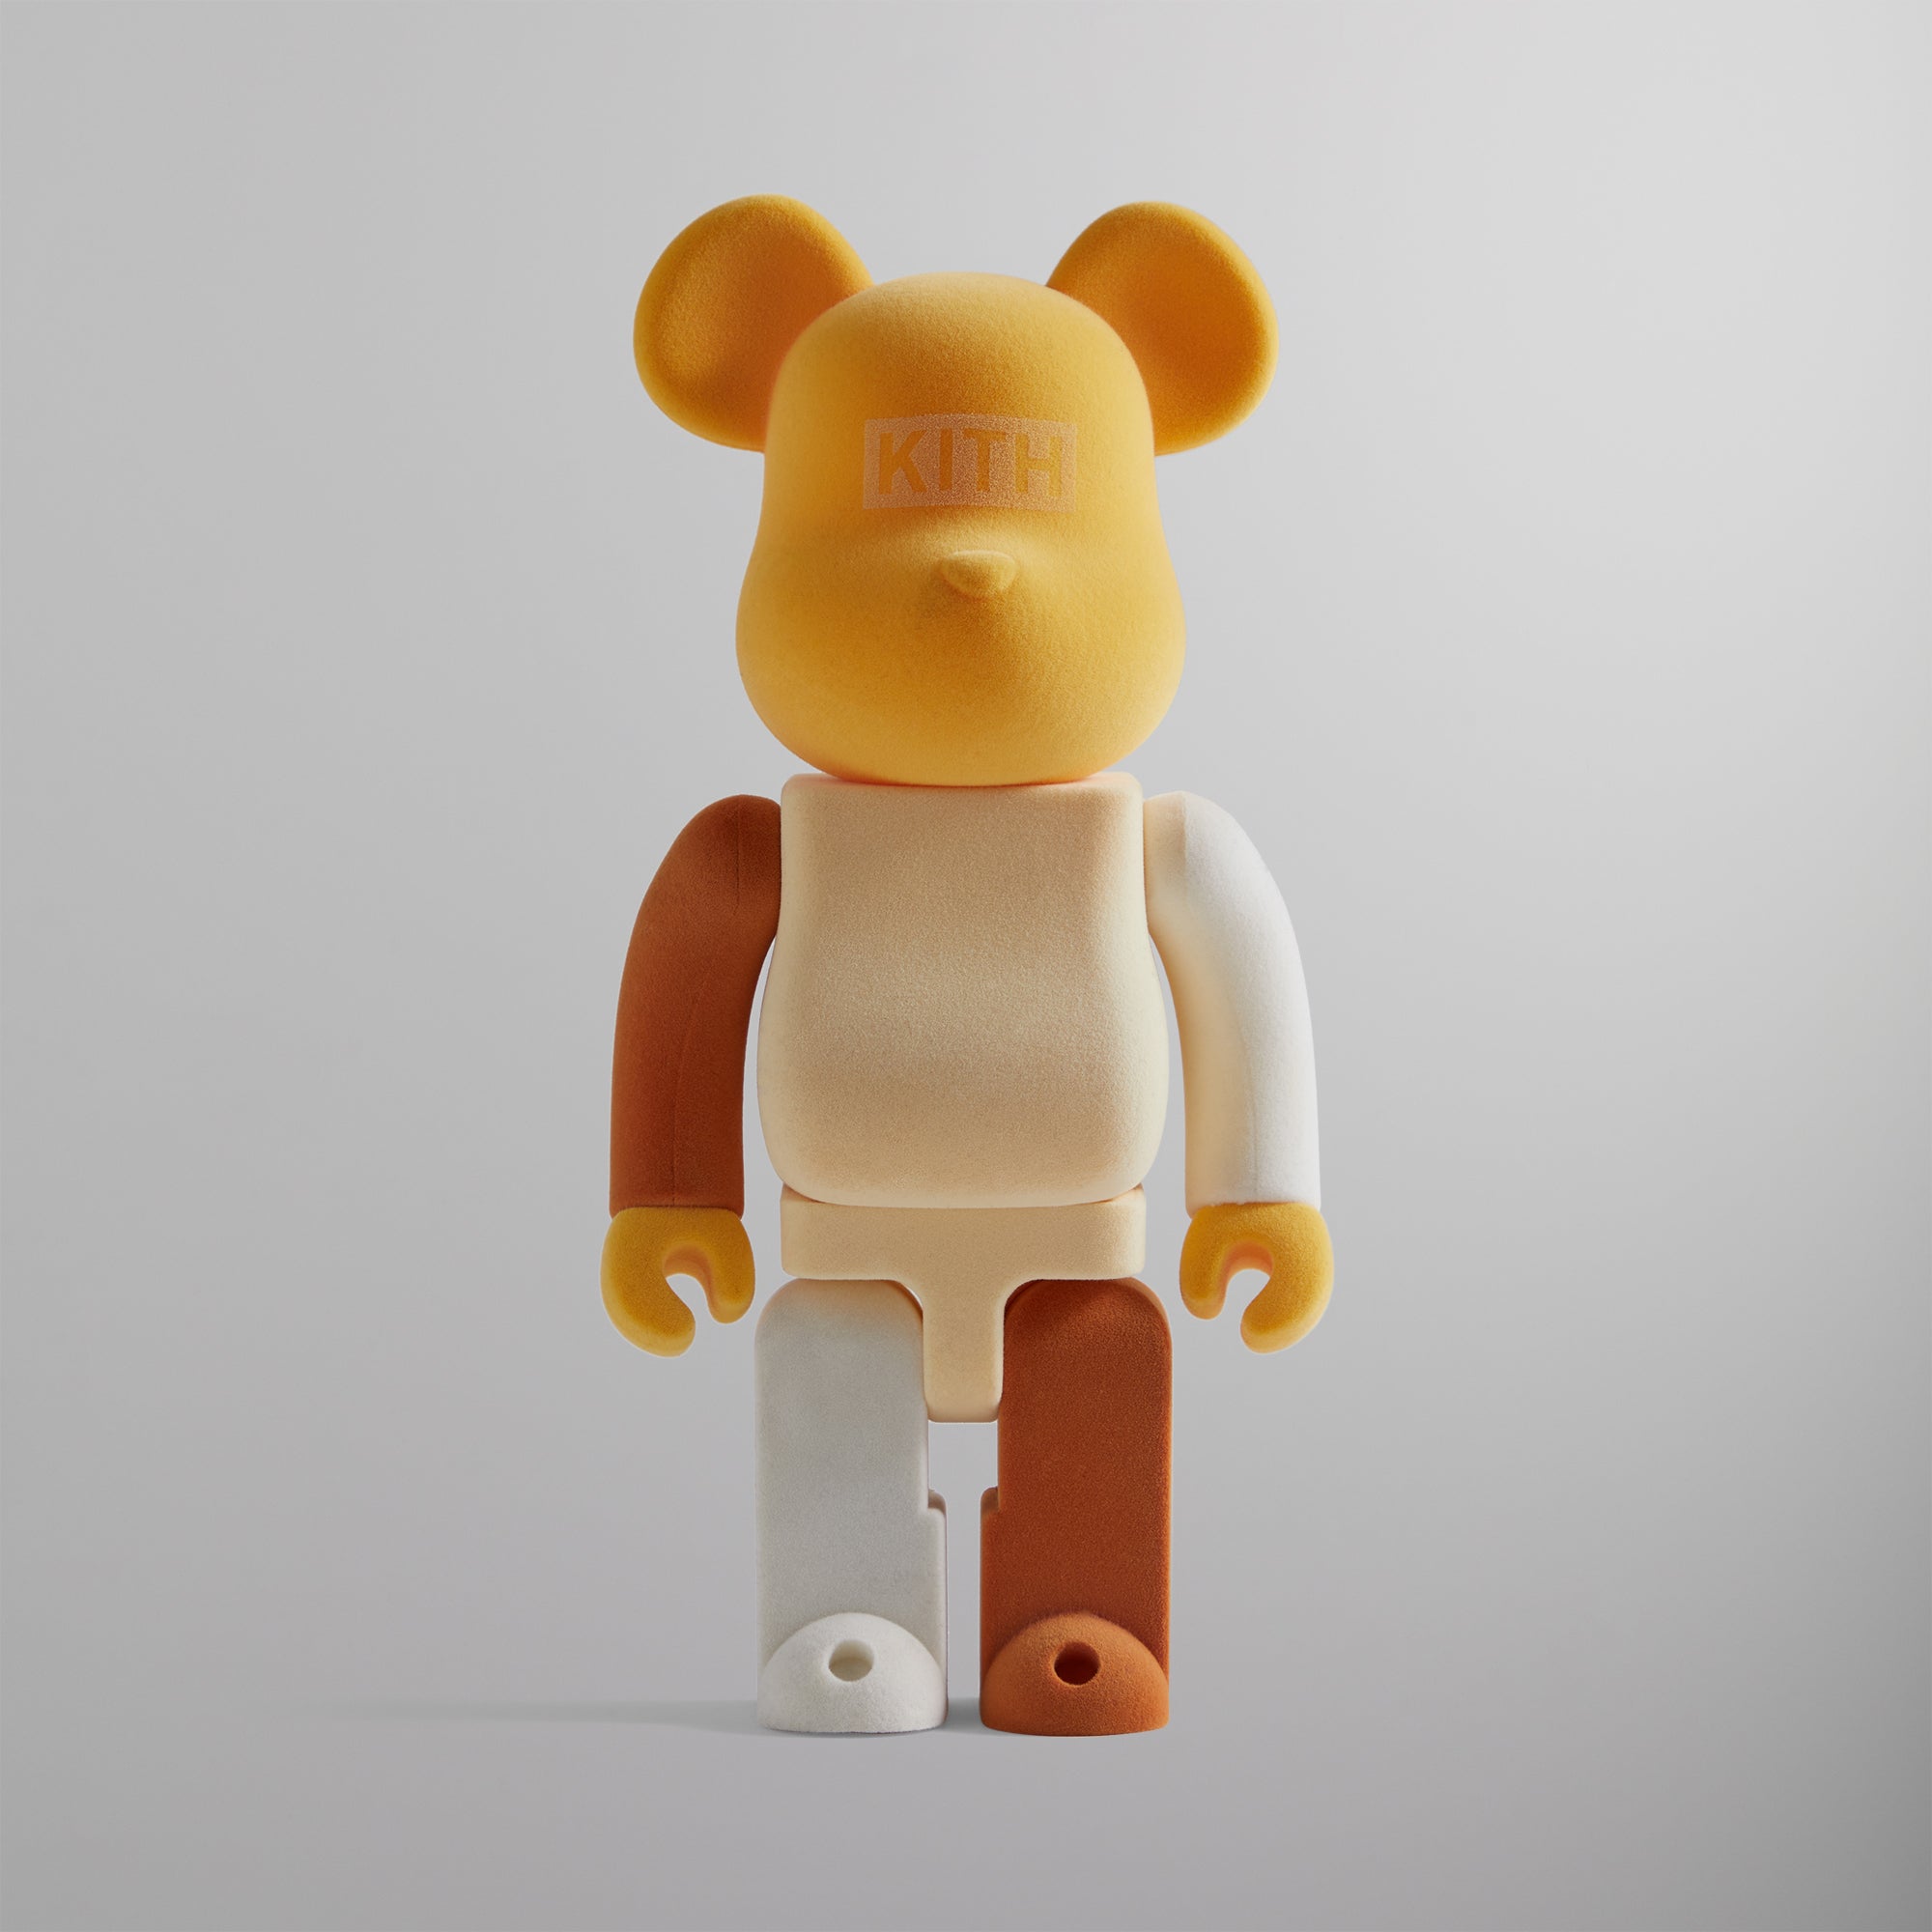 SEAL限定商品】 Bearbrick for Kith その他 The 1000% Palette その他 